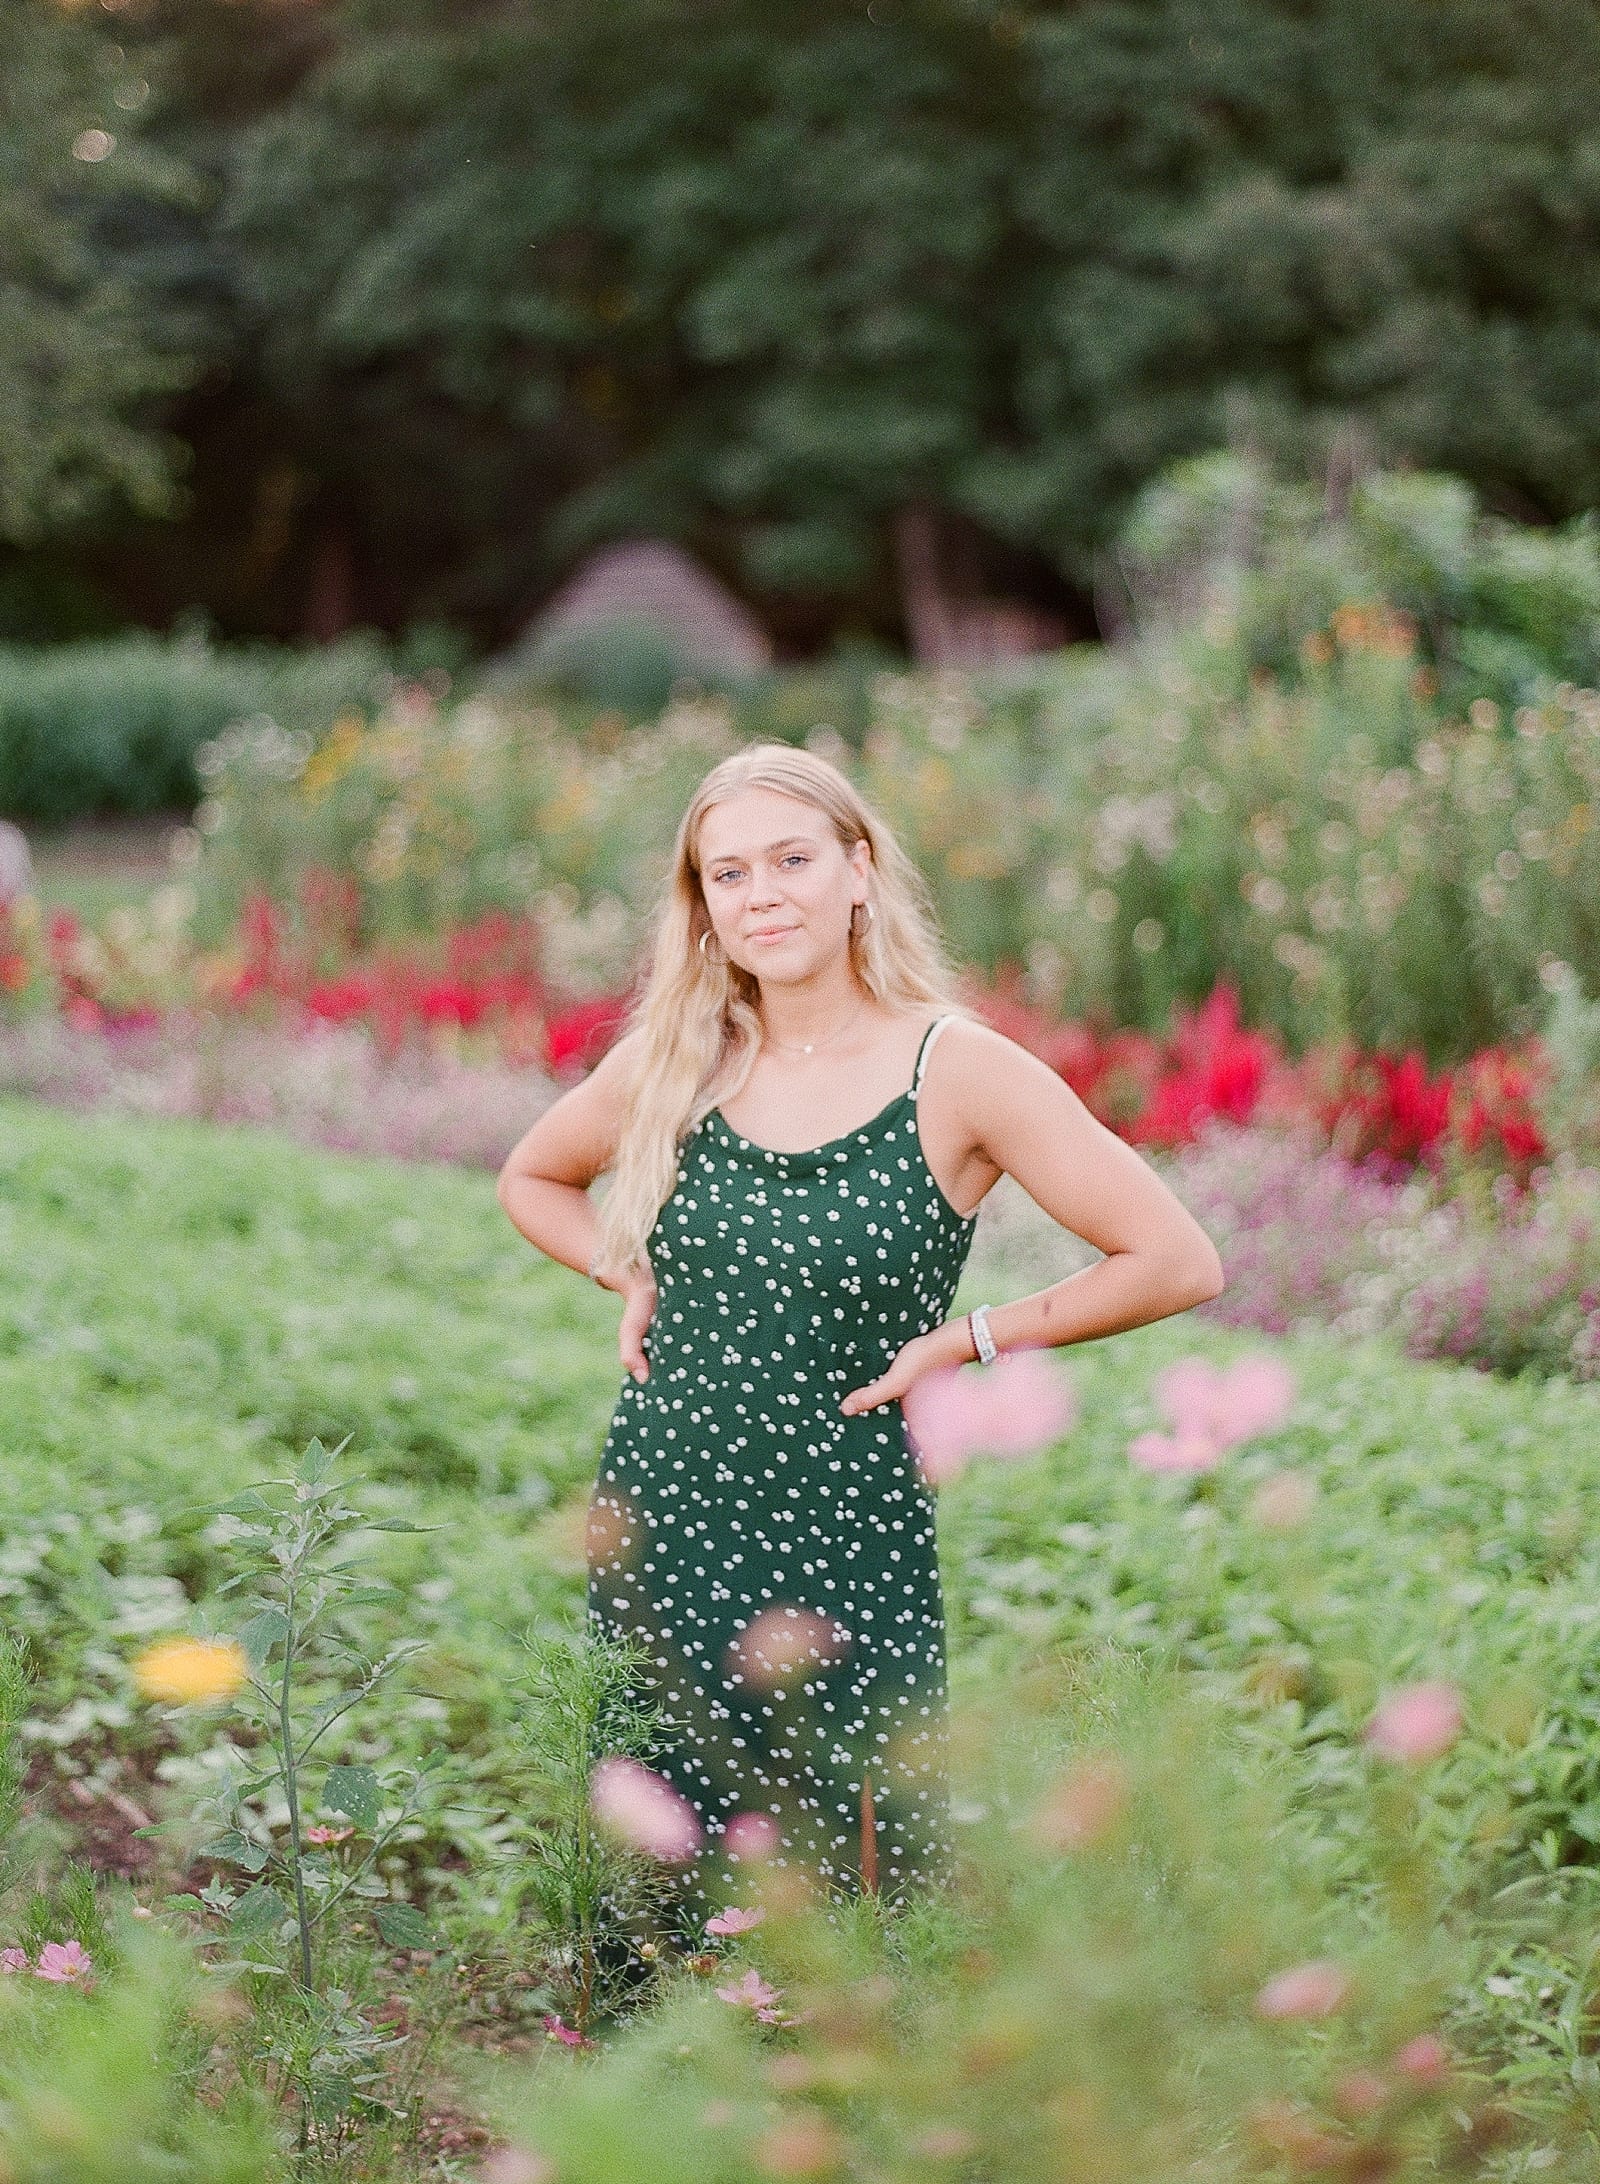 Top Tips For The Best Senior Photos Girl in Garden with hands on hips photo